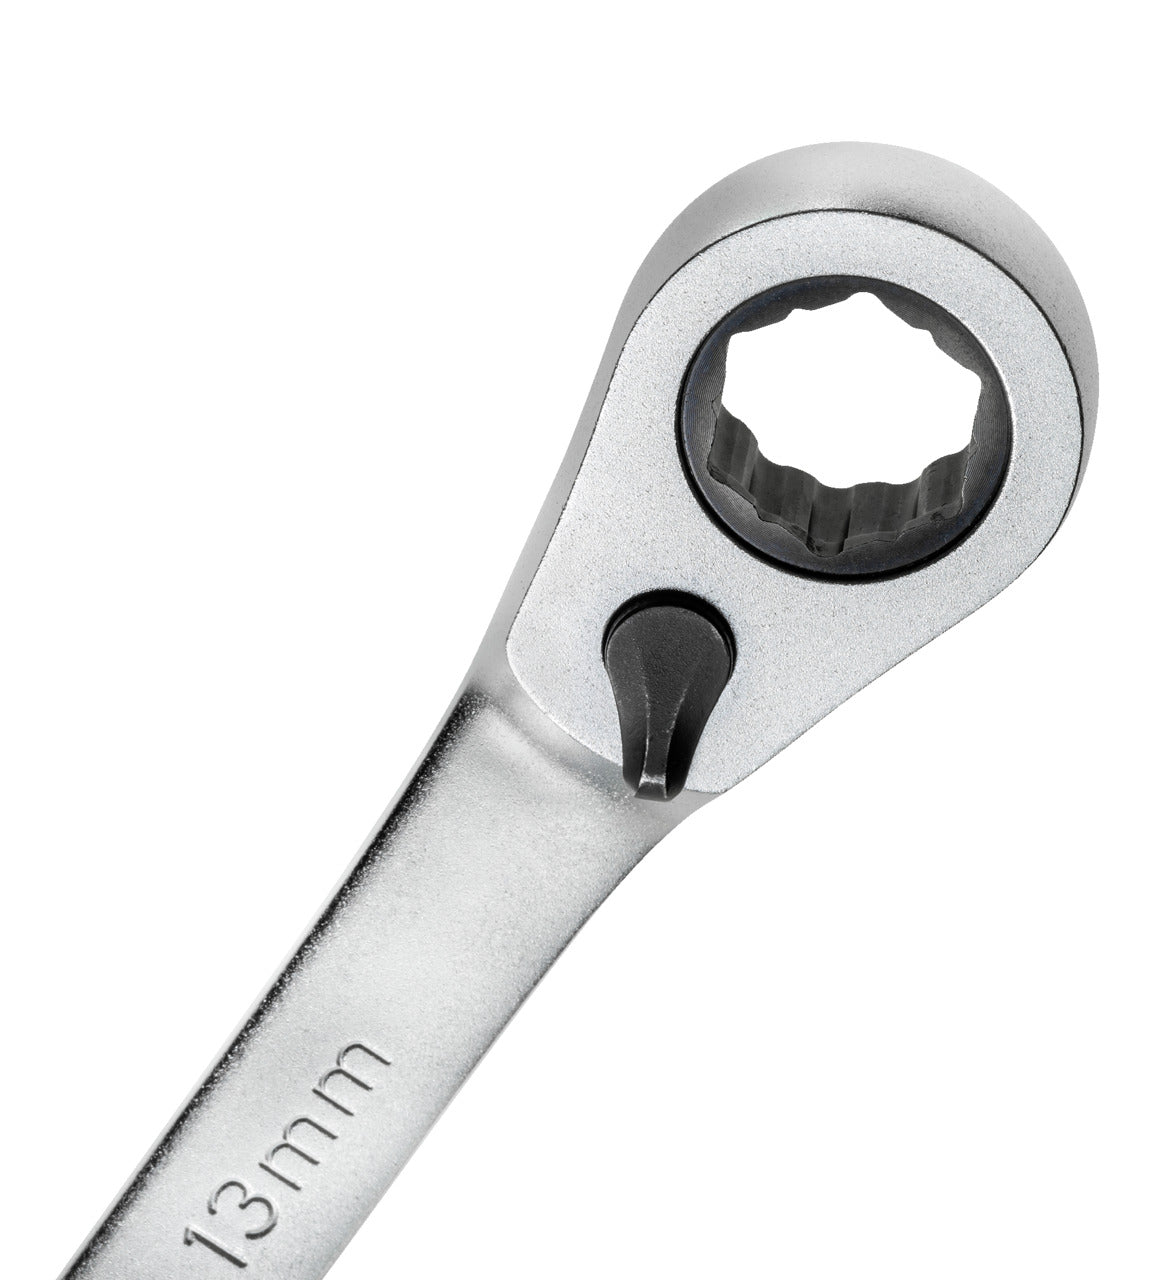 GEDOREred R07201190 - Reversible ratchet combination wrench with clamping function, 19mm (3301007)